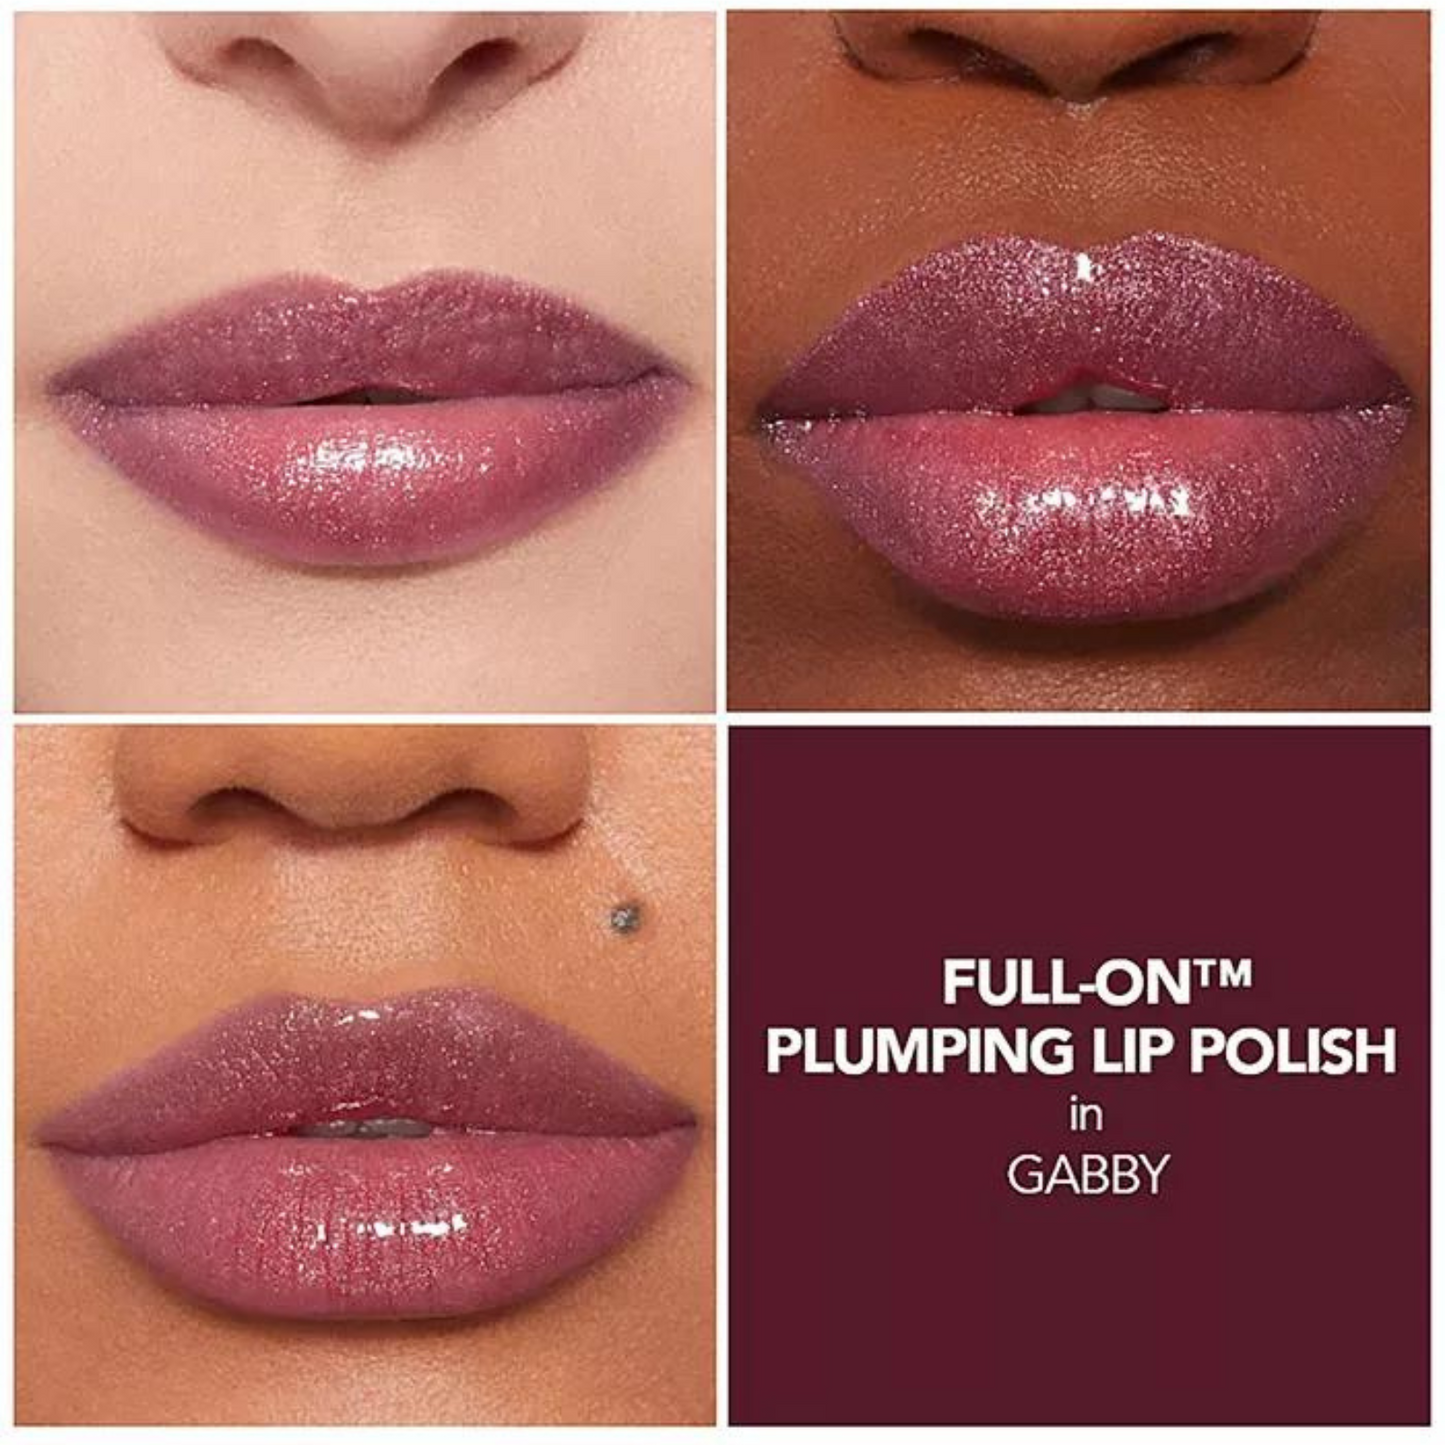 Buxom - For The Win Plumping Lip Set